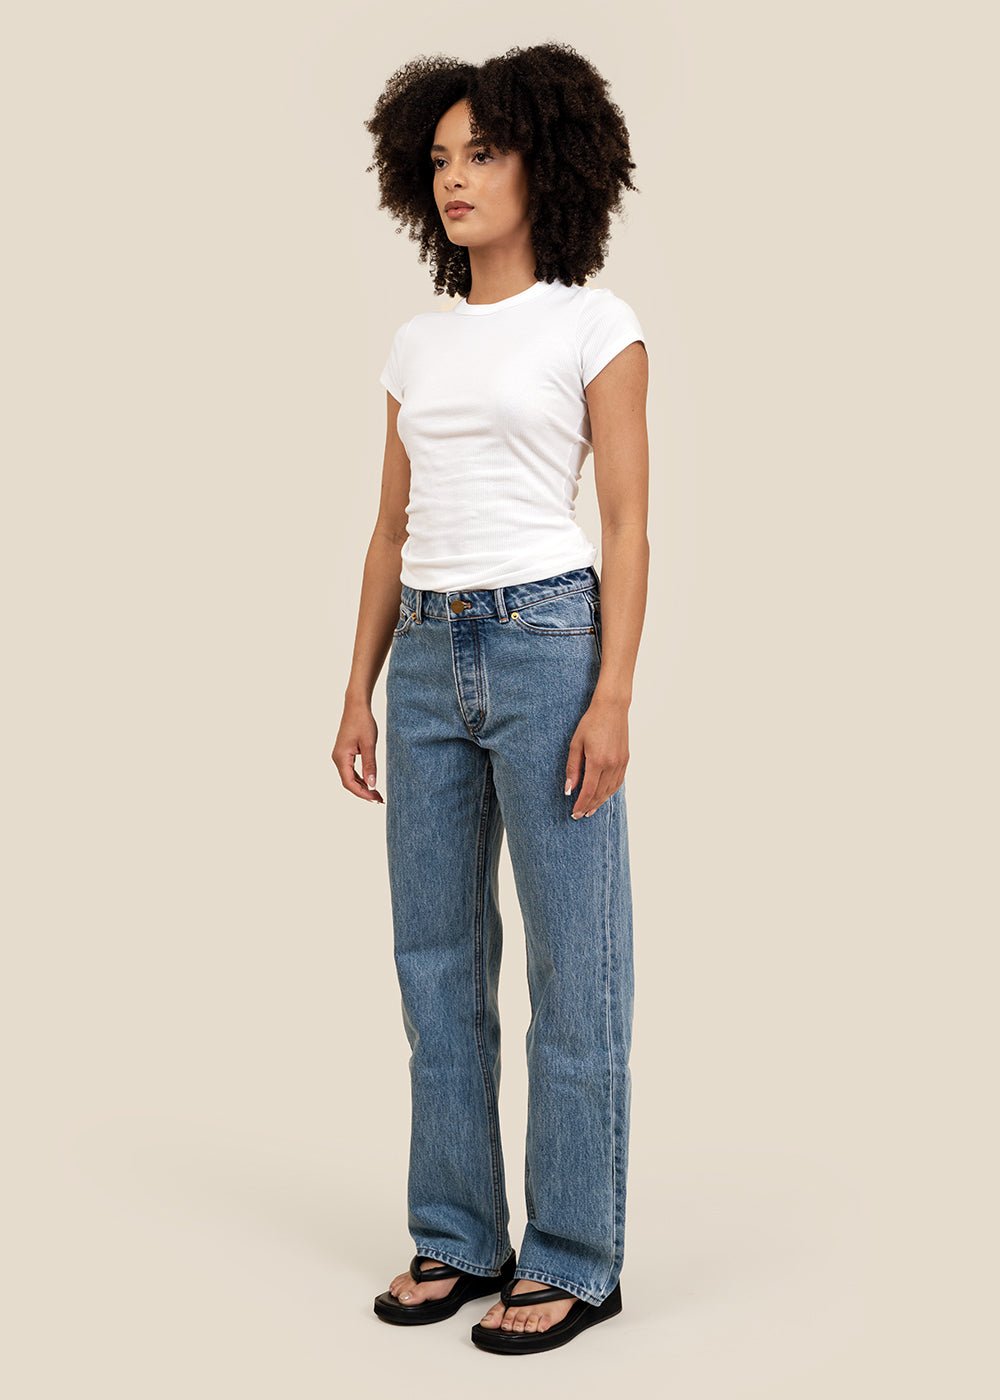 https://newclassics.ca/cdn/shop/products/stylein-vintage-blue-kim-denim-jeans-new-classics-studios-sustainable-and-ethical-fashion-canada-225999_1000x.jpg?v=1687282420